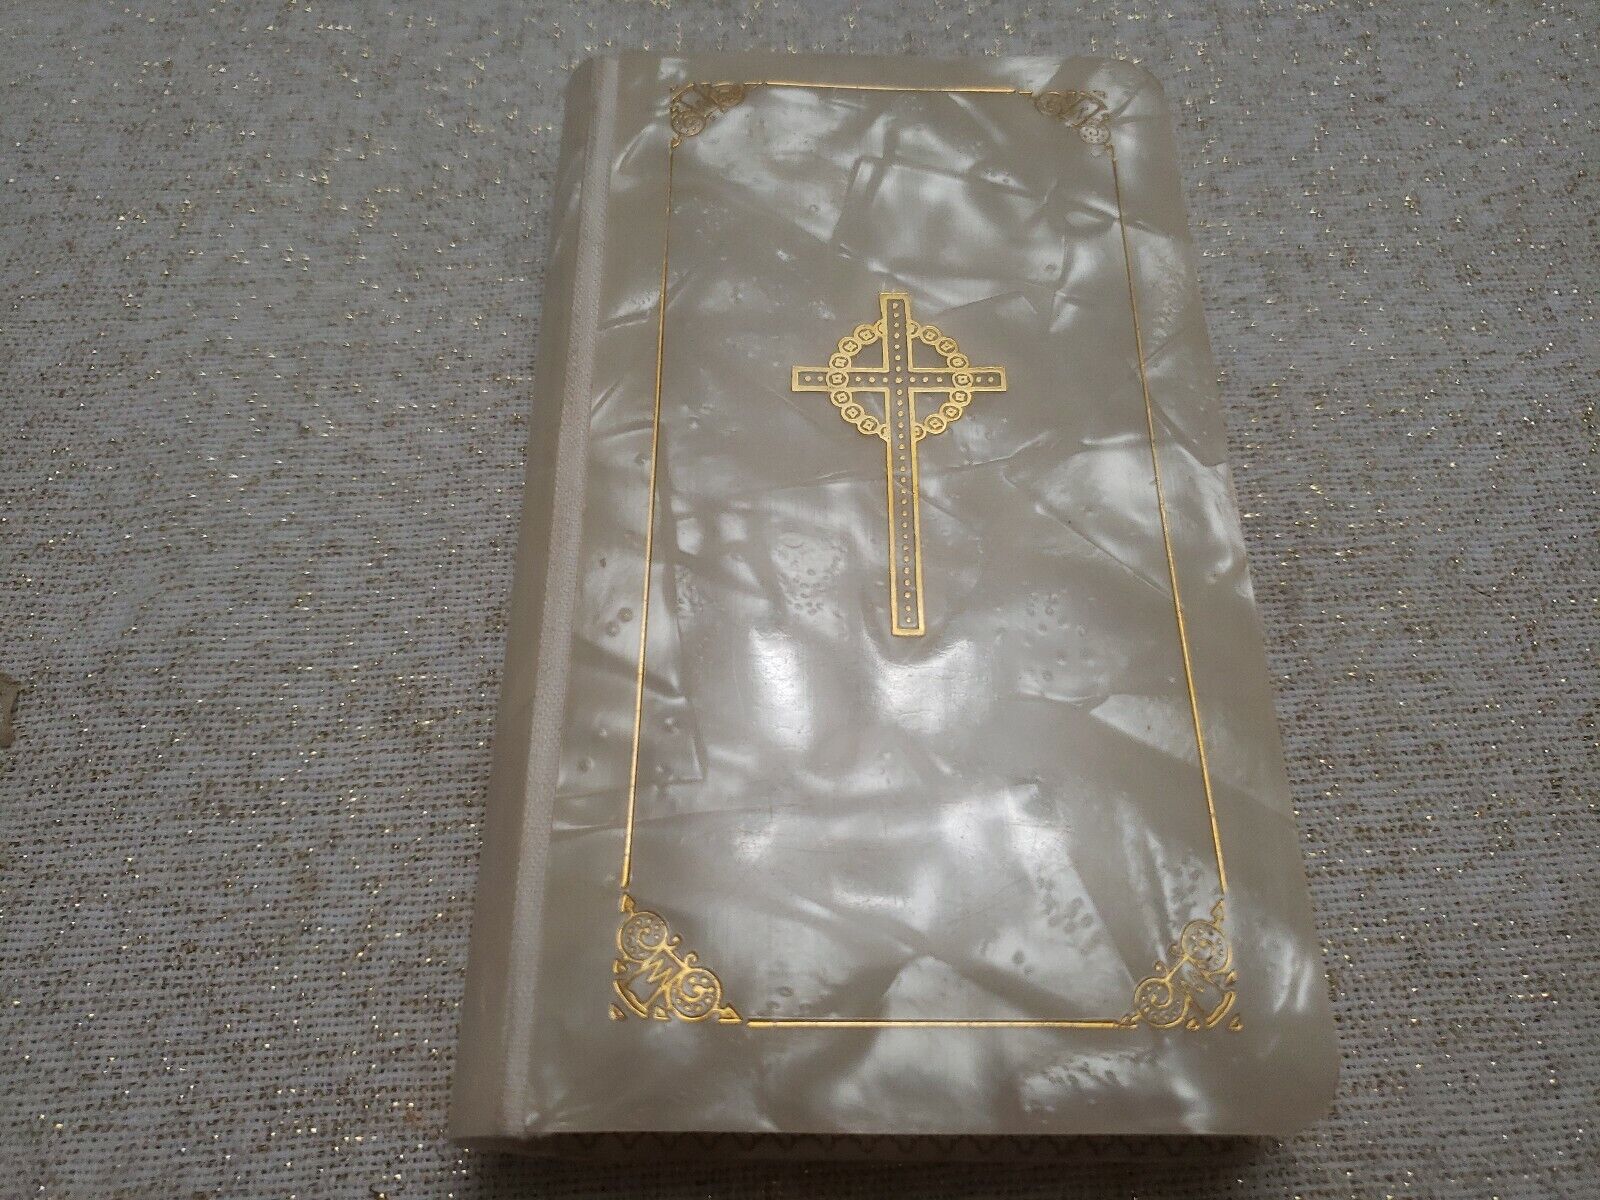 1951 MOTHER of PEARL CASE (The New Sunday Missal Rare New- Fast shipping